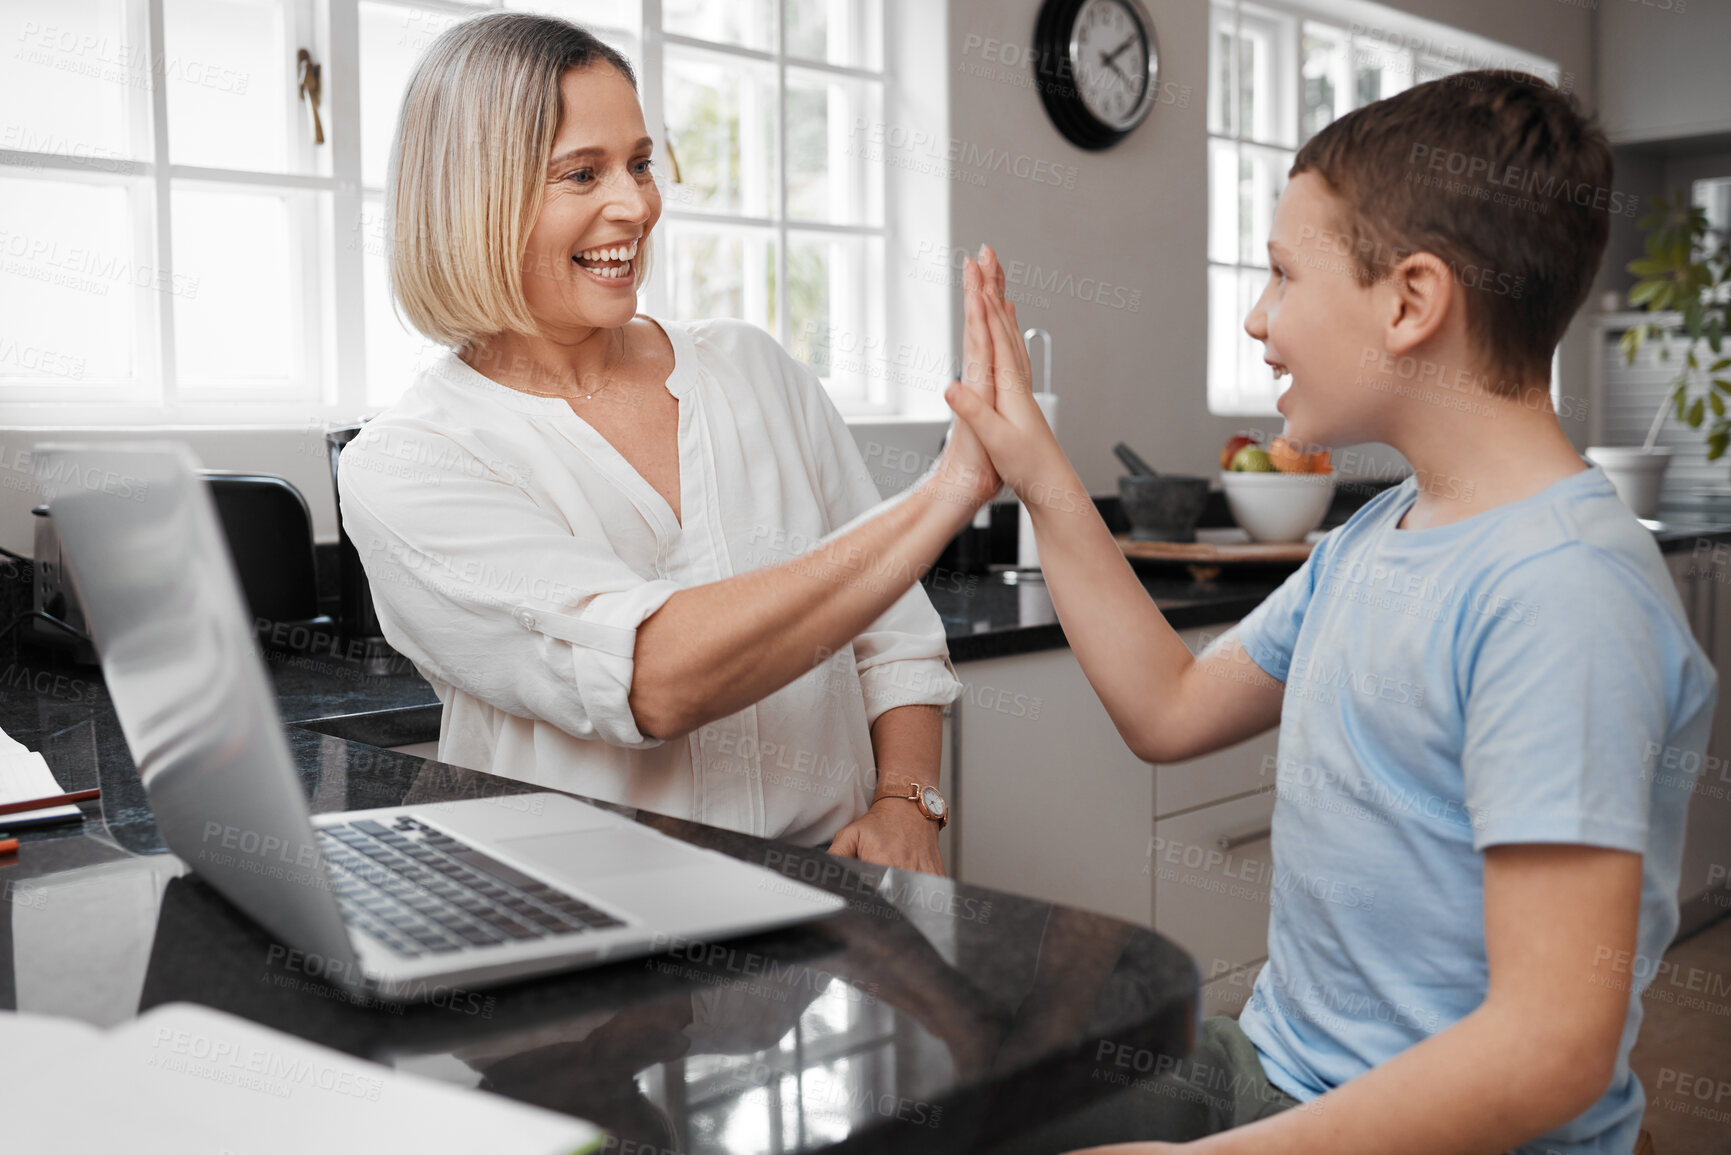 Buy stock photo Shot of a young mother and her son high fiving while home schooling